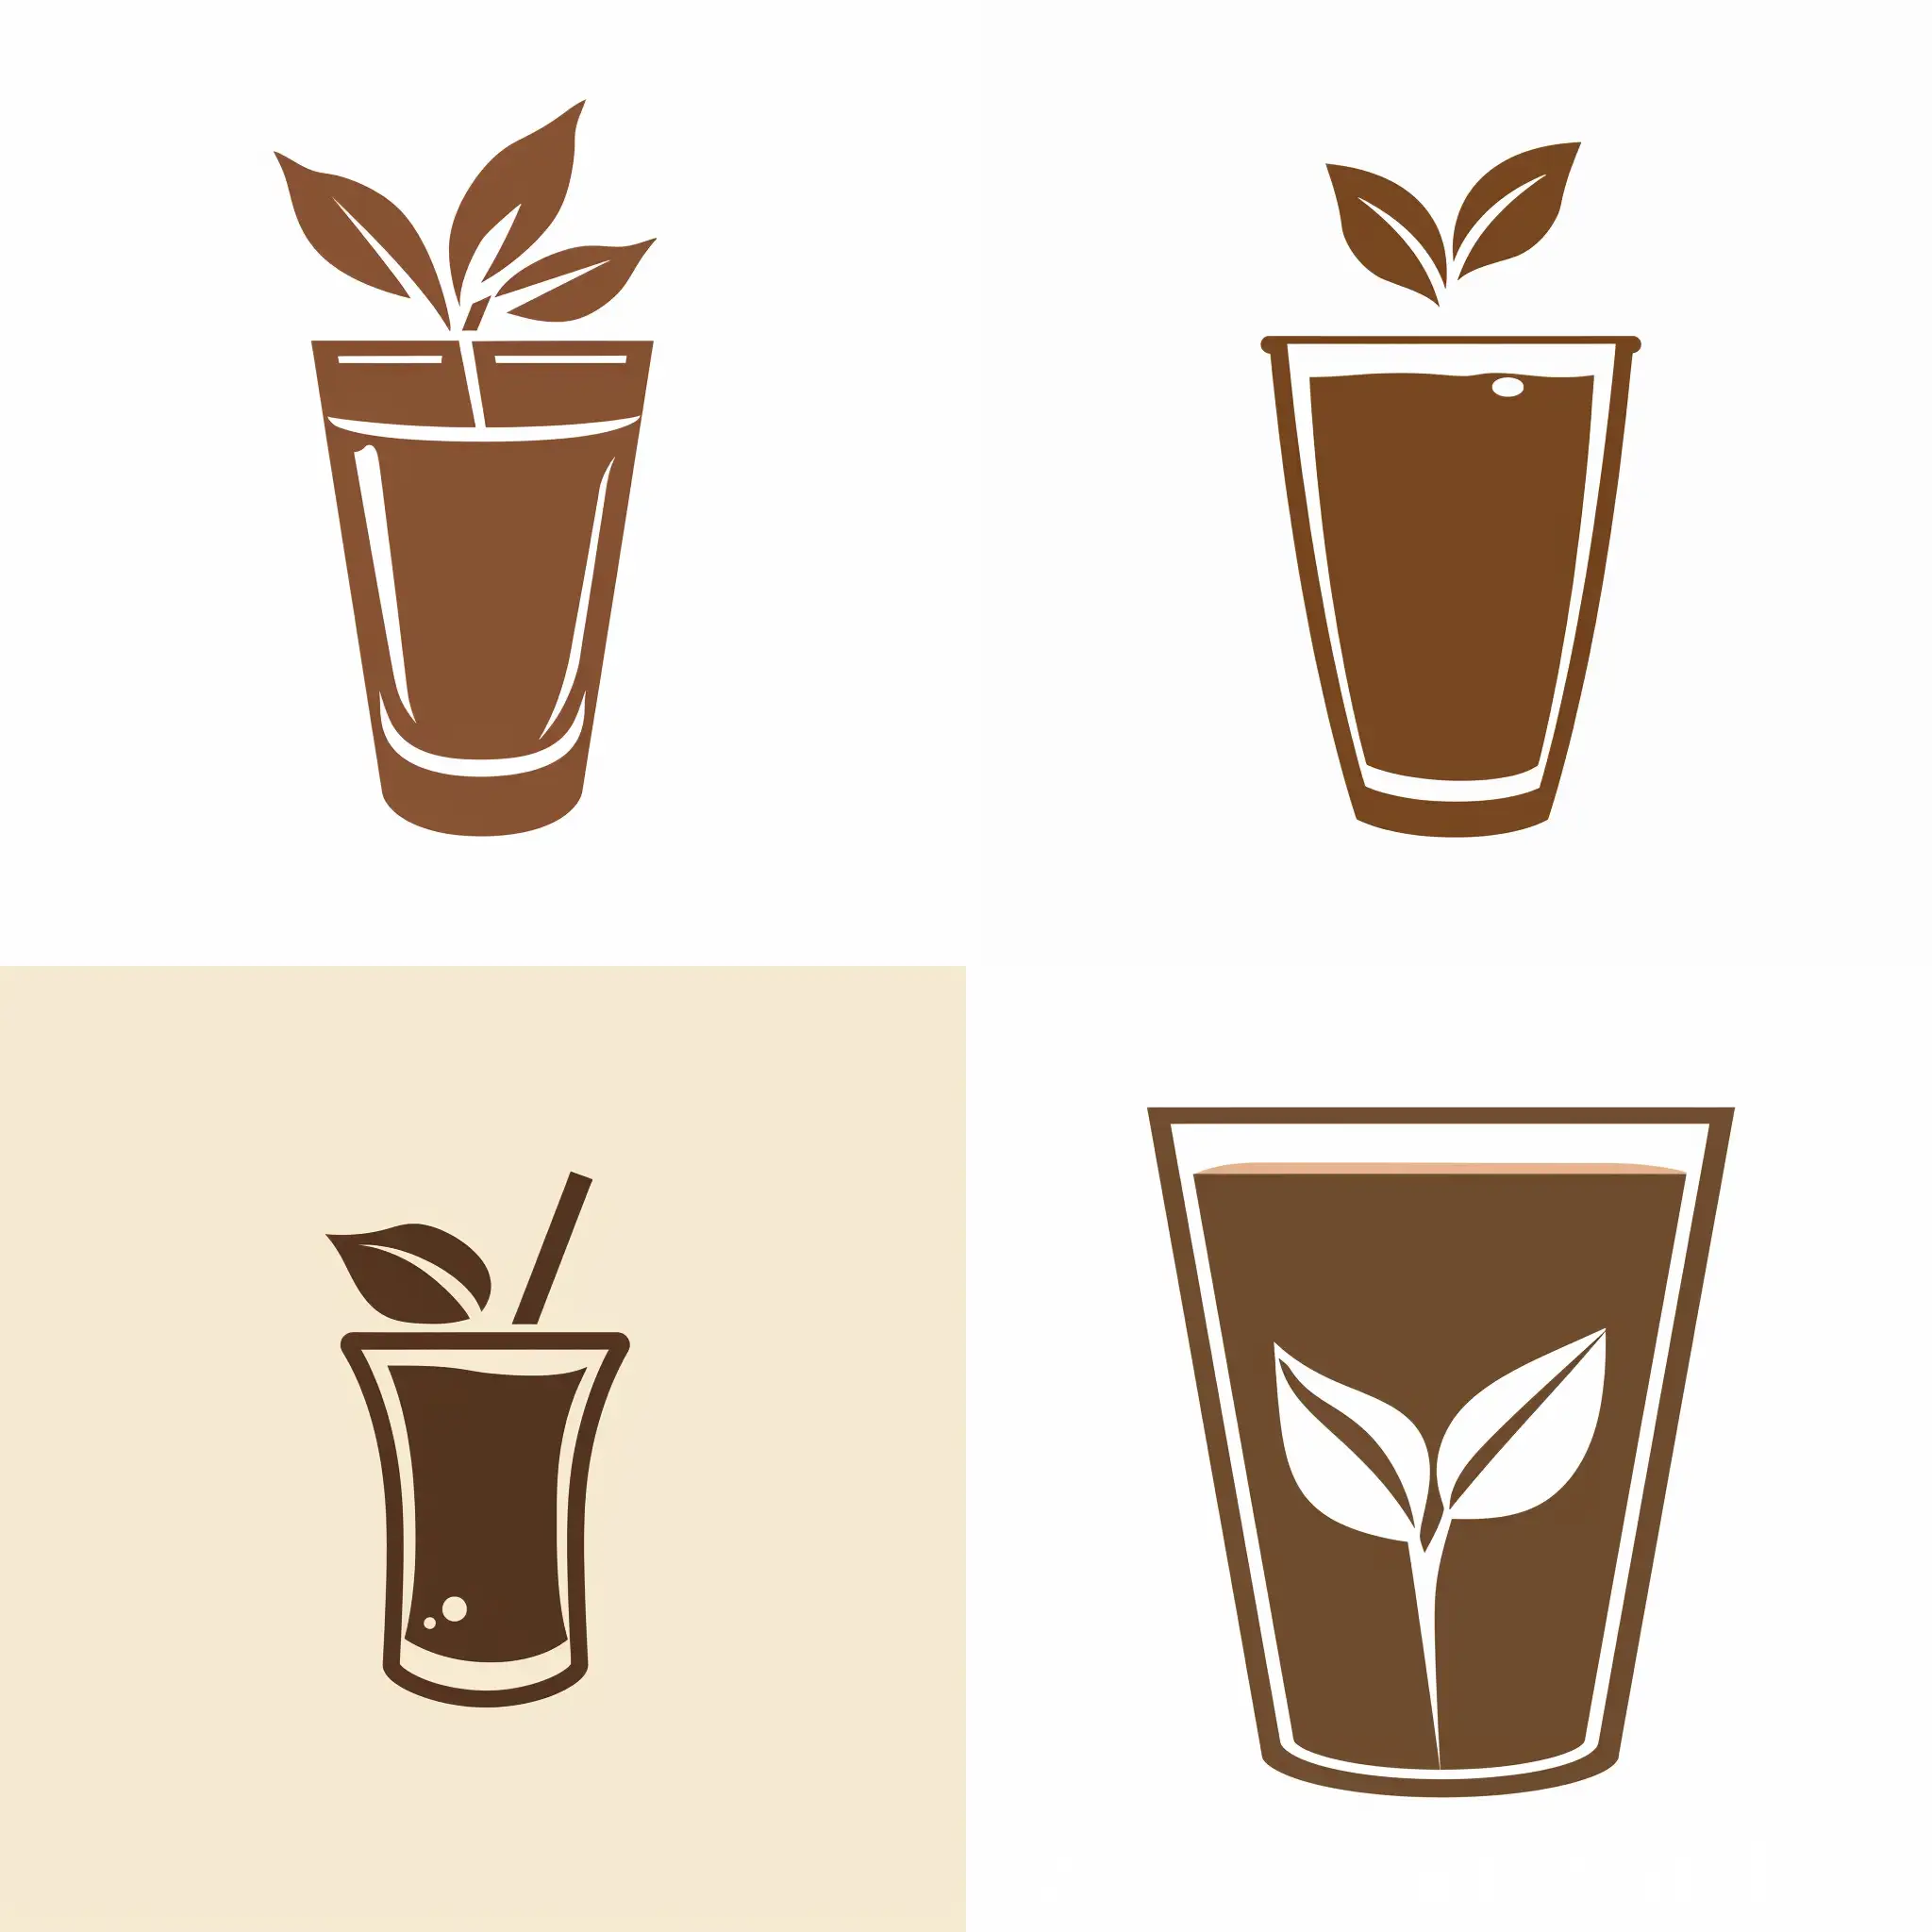 Healthy-Chocolate-Drink-Logo-Design-in-Simple-Style